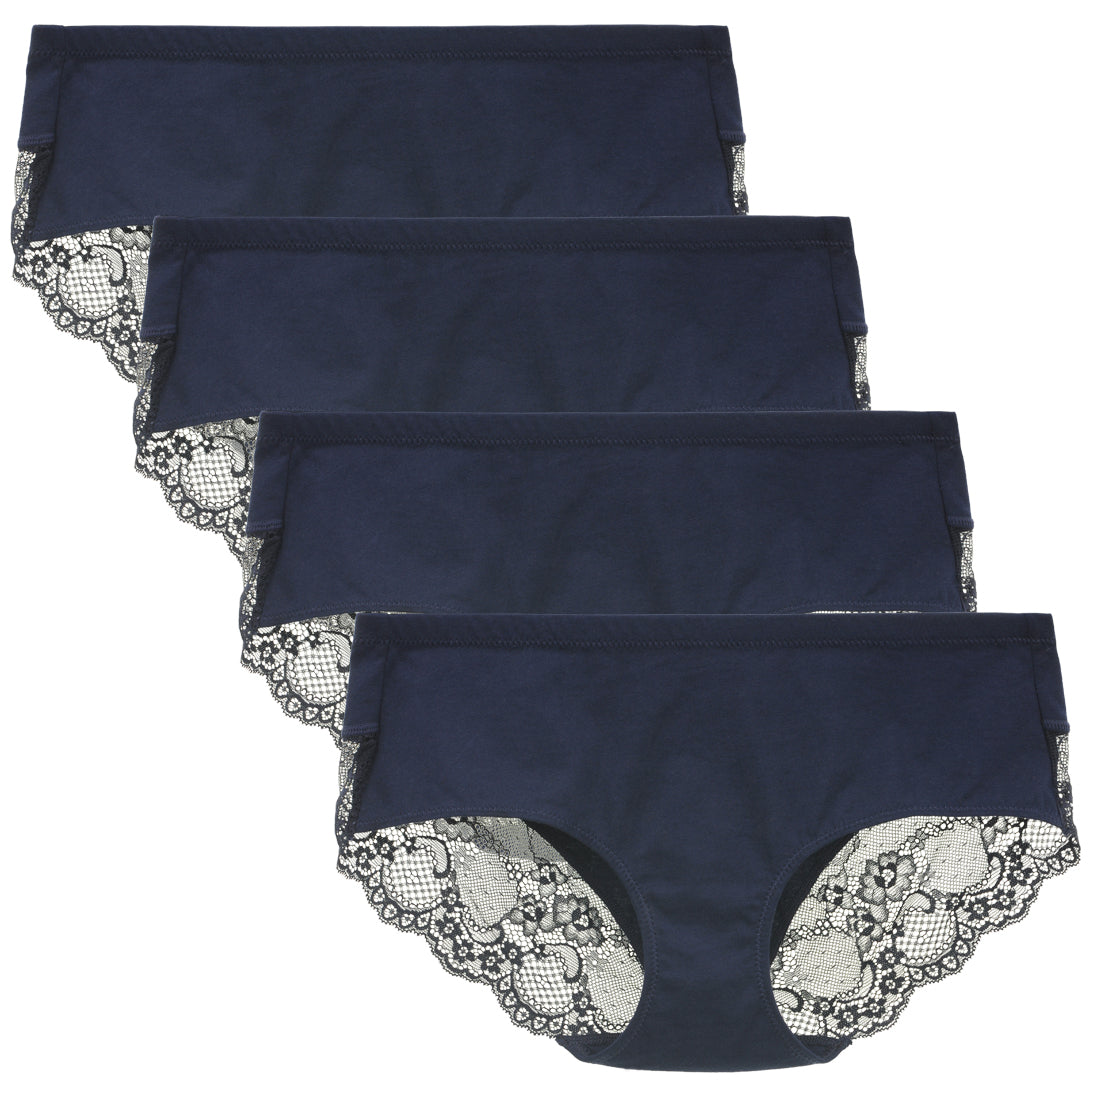 Cacique Cotton Full Brief Panty Navy Blue Size 18/20